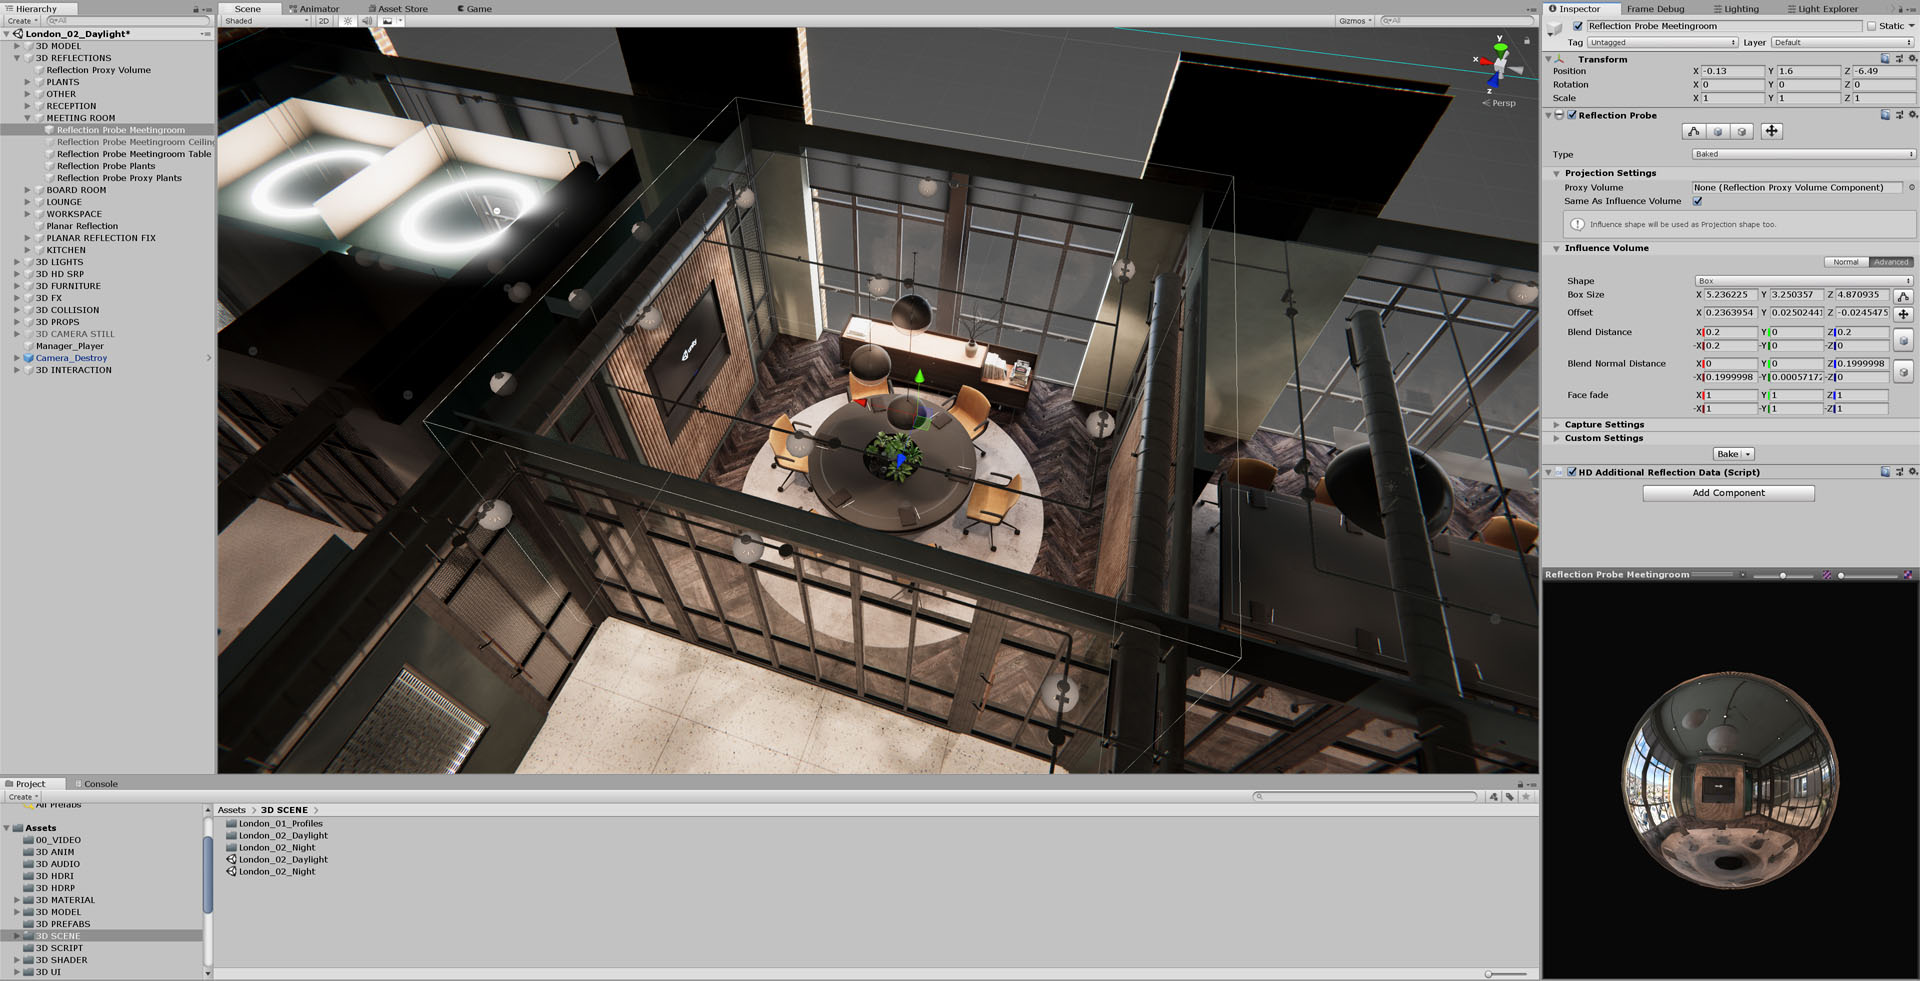 Making_of_VRE_for_ArchViz_with_Unity-Reflection probe